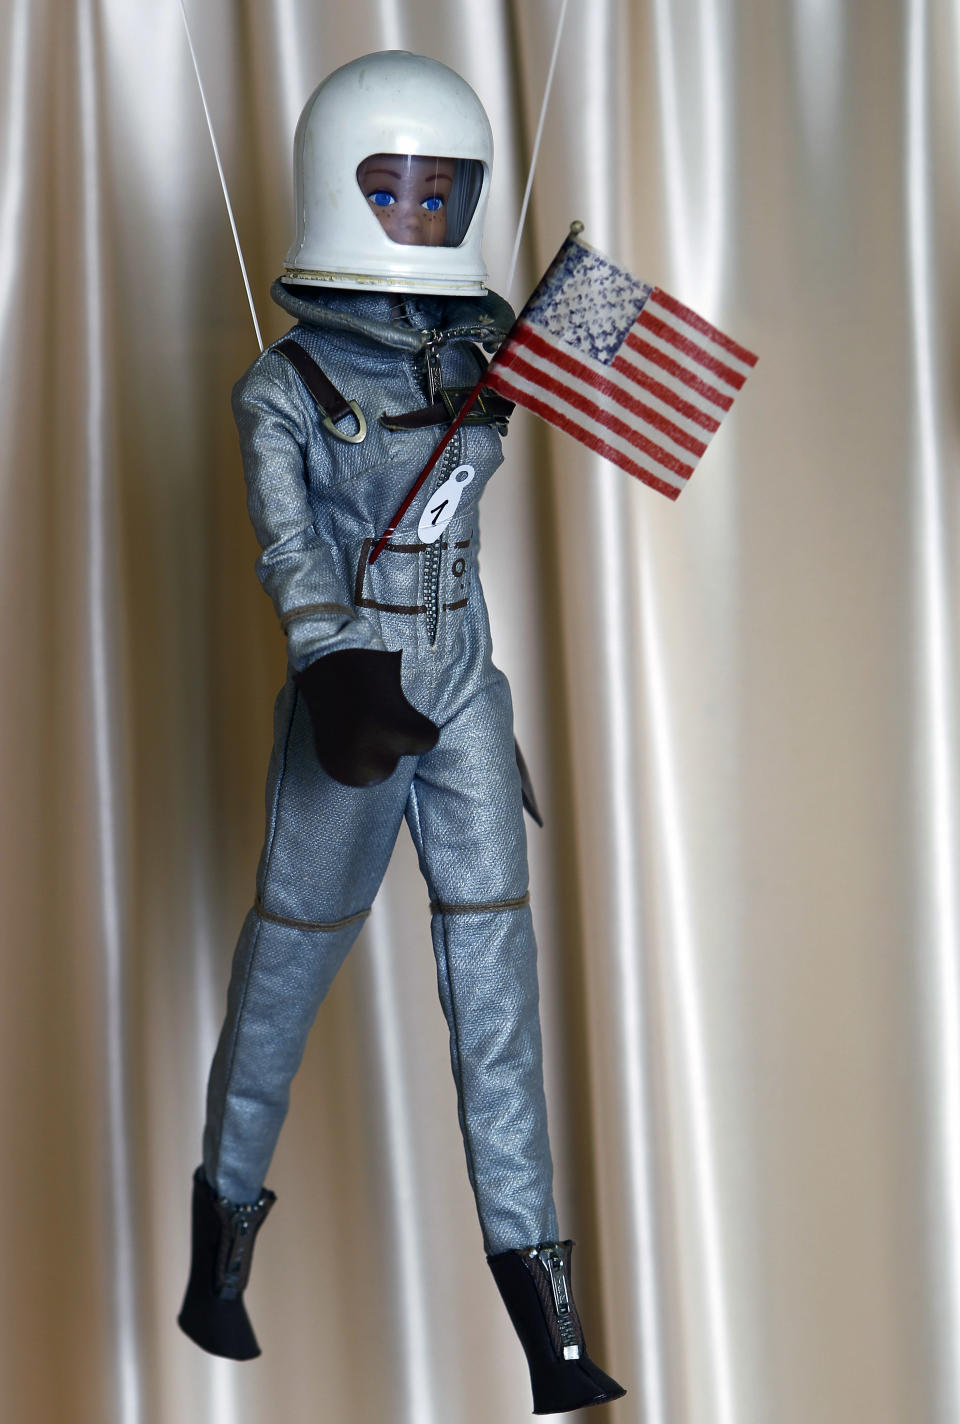 Astronaut Barbie first debuted in 1965. Here, the doll is seen photographed in 2014 at an exhibit in France.&nbsp;